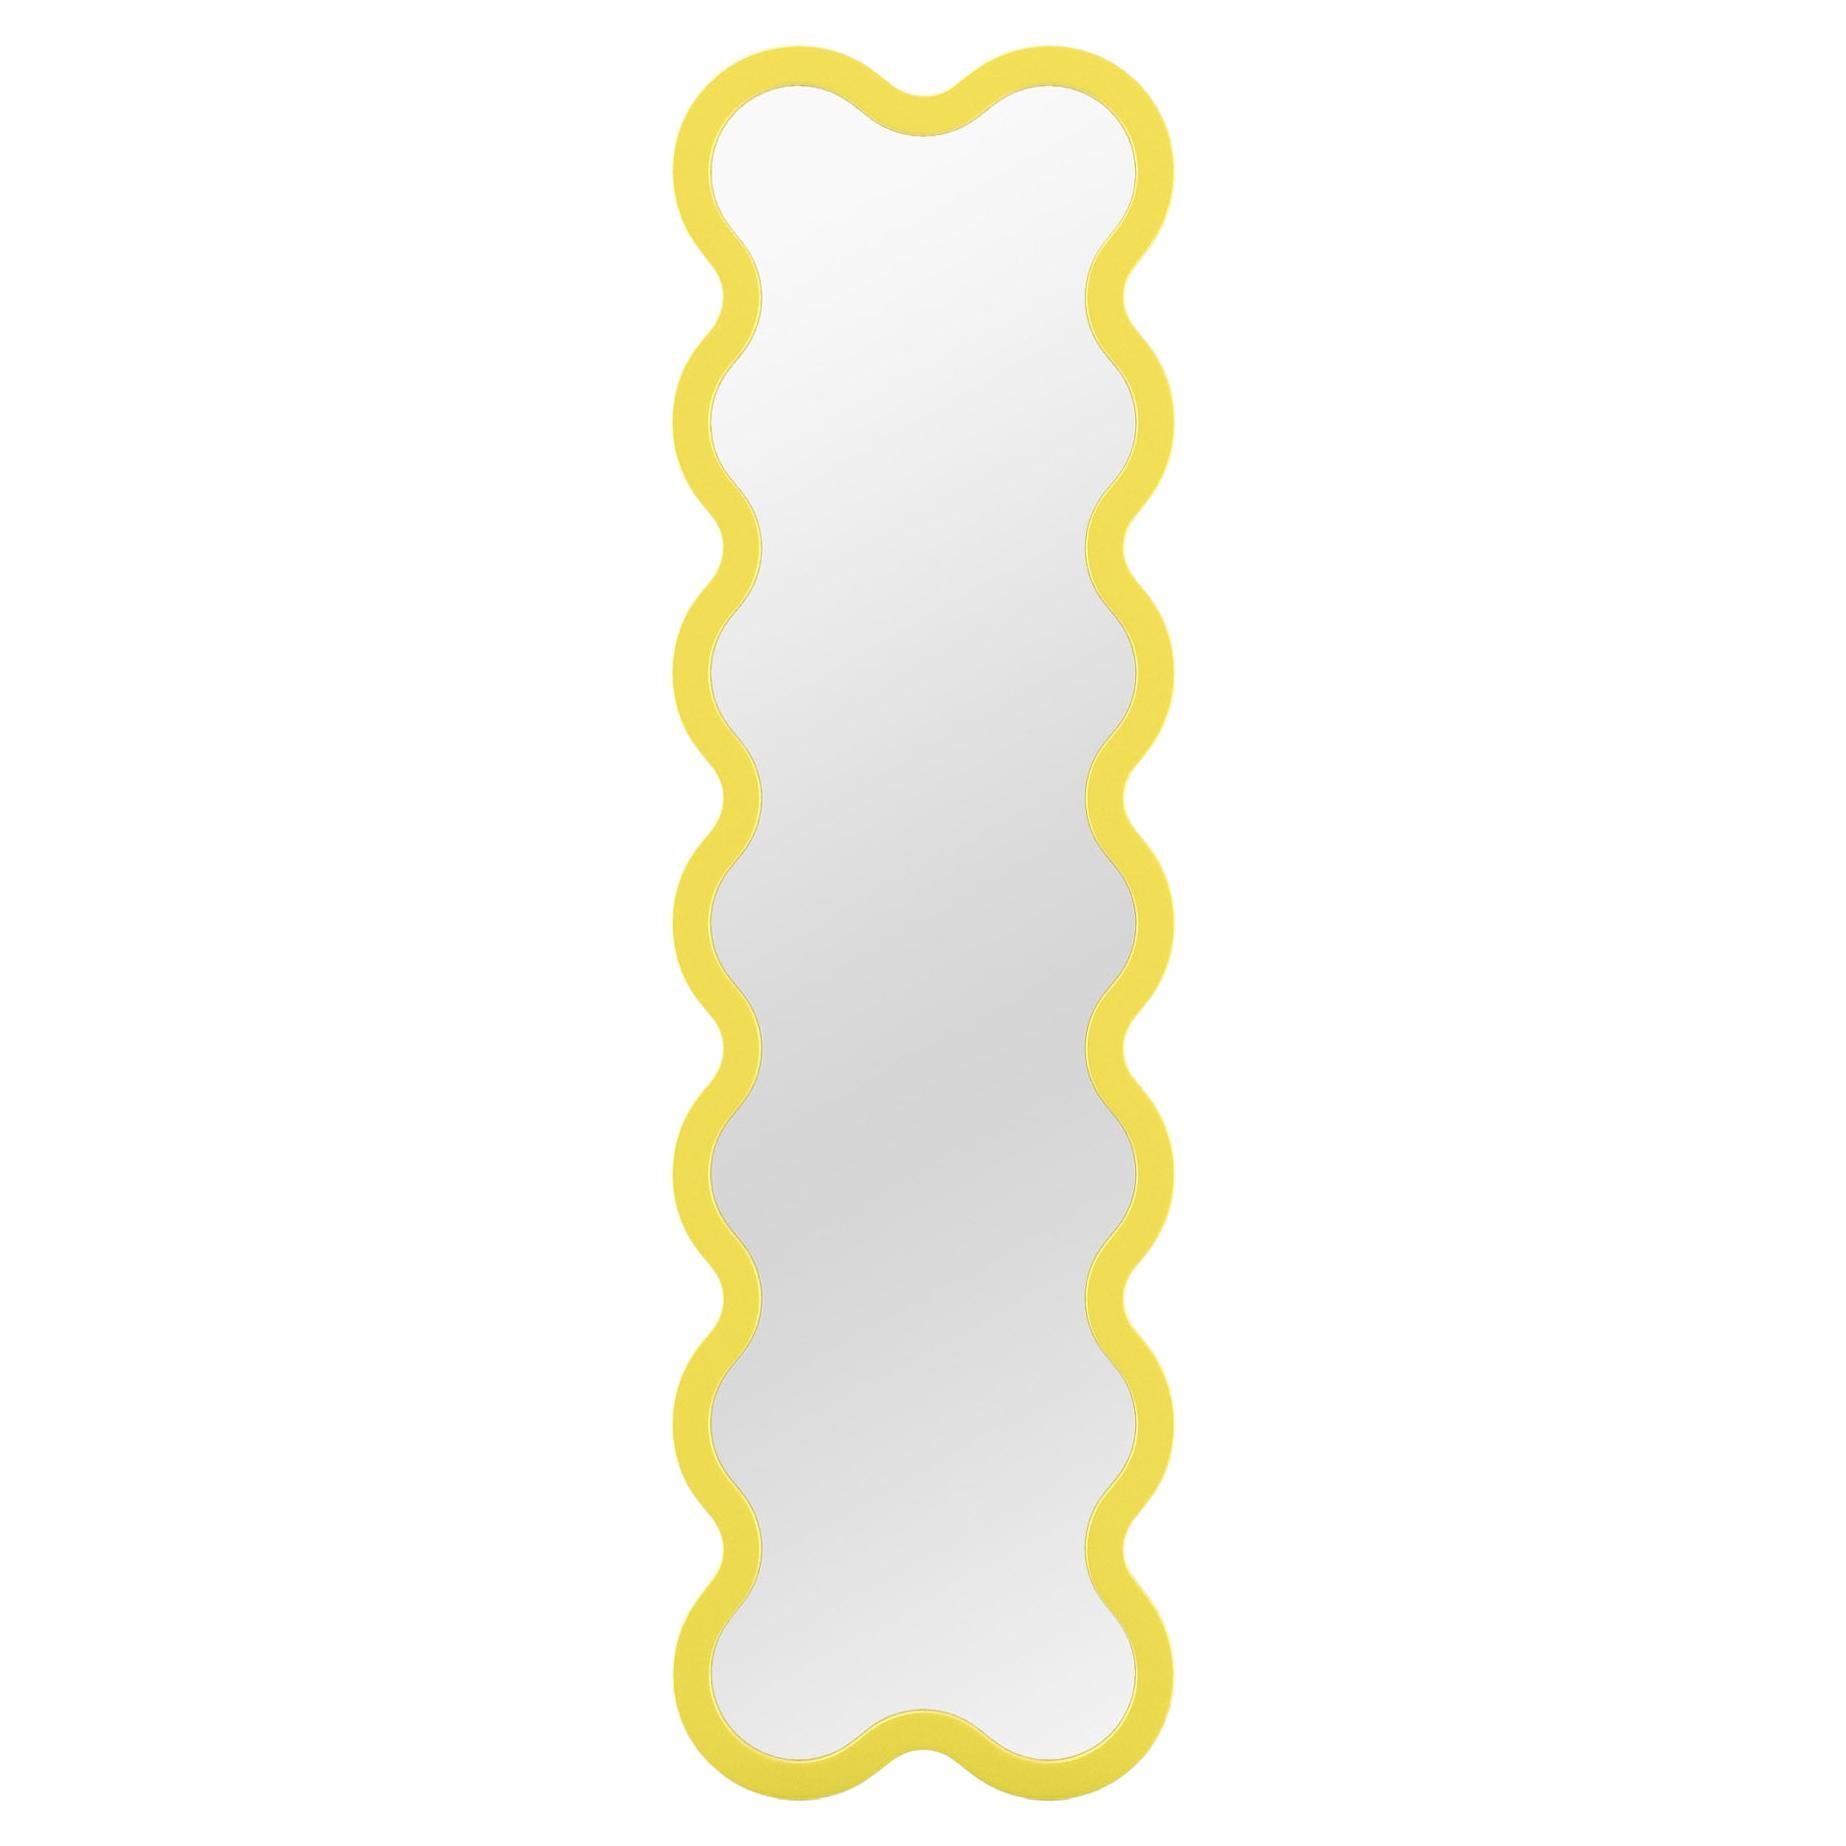 Contemporary Mirror 'Hvyli 14' by Oitoproducts, Yellow Frame For Sale